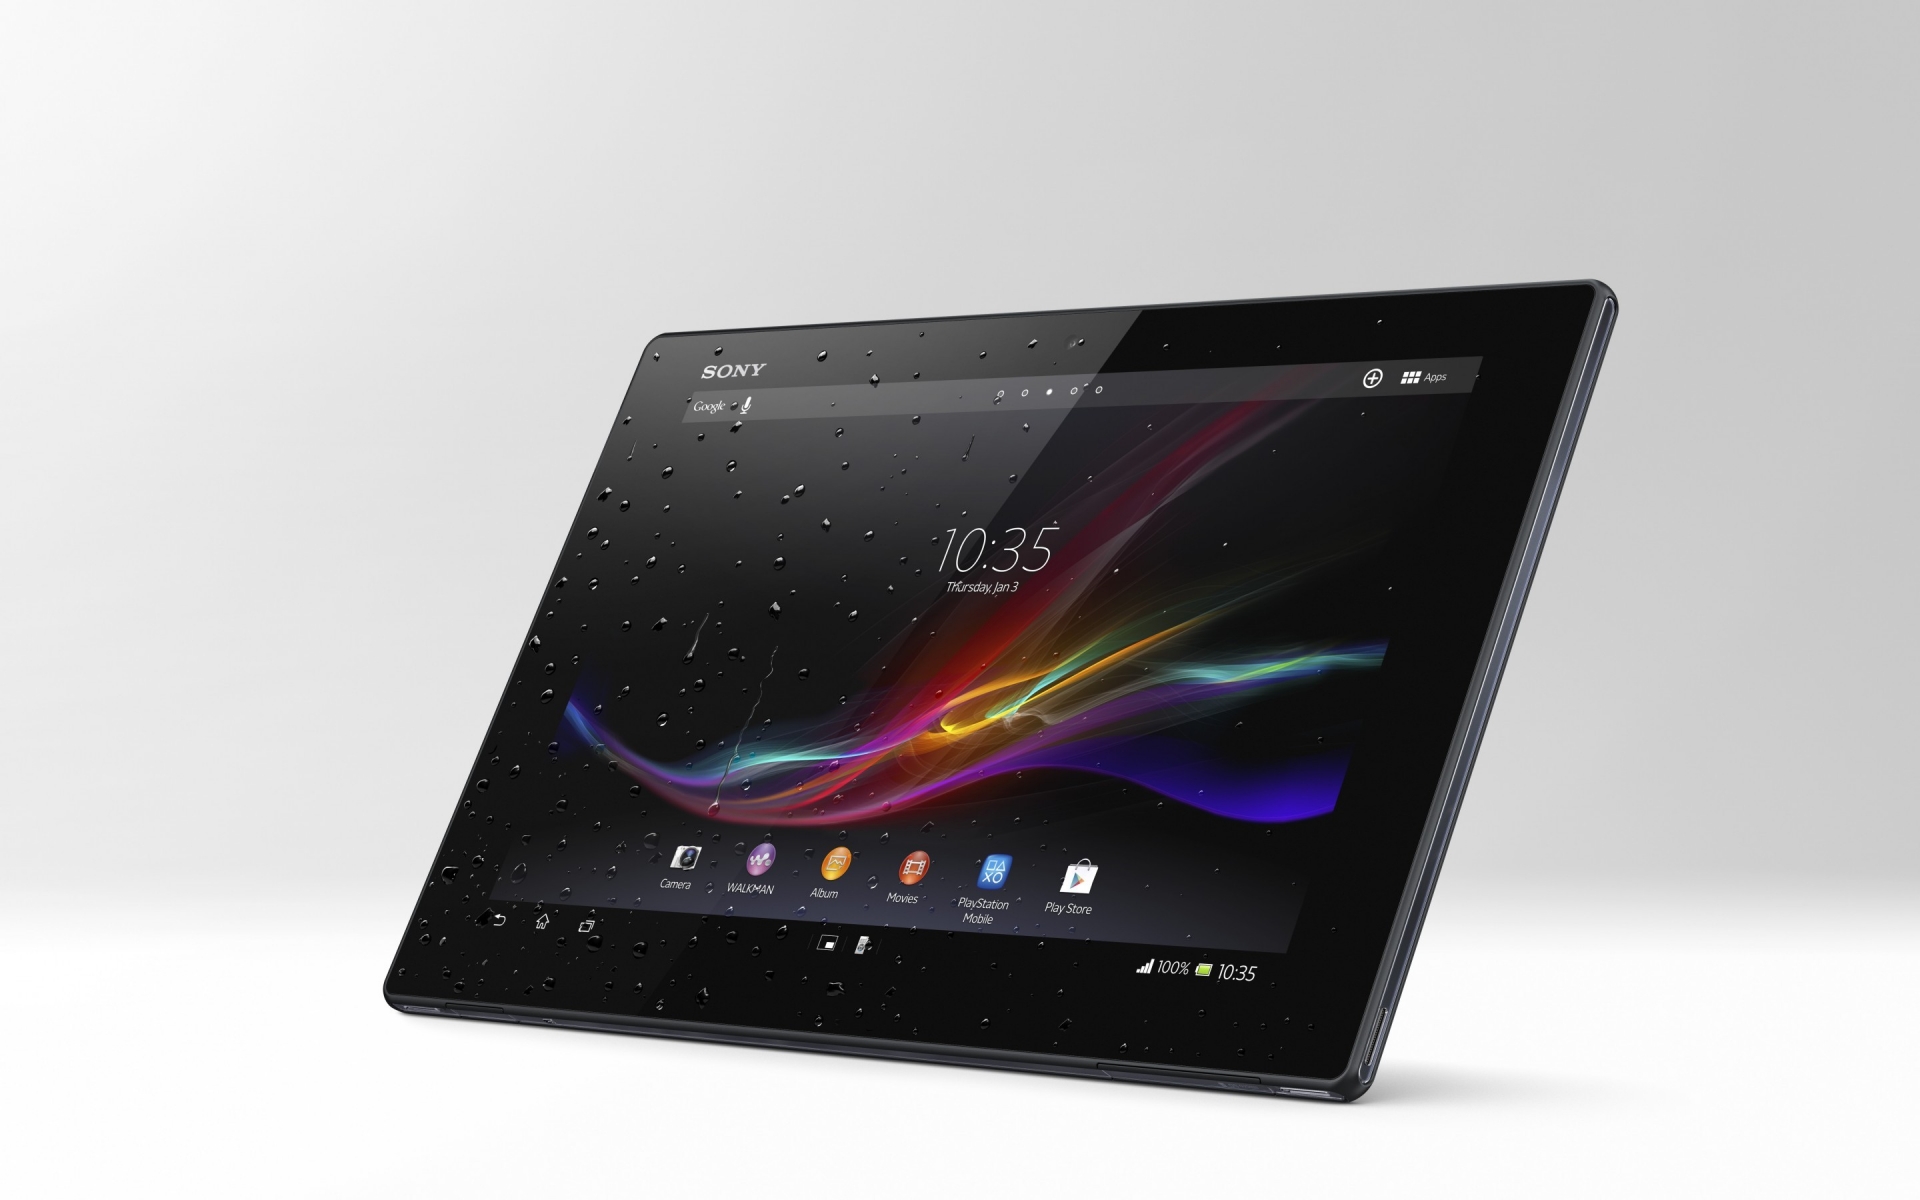 New Sony Xperia Z Tablet for 1920 x 1200 widescreen resolution